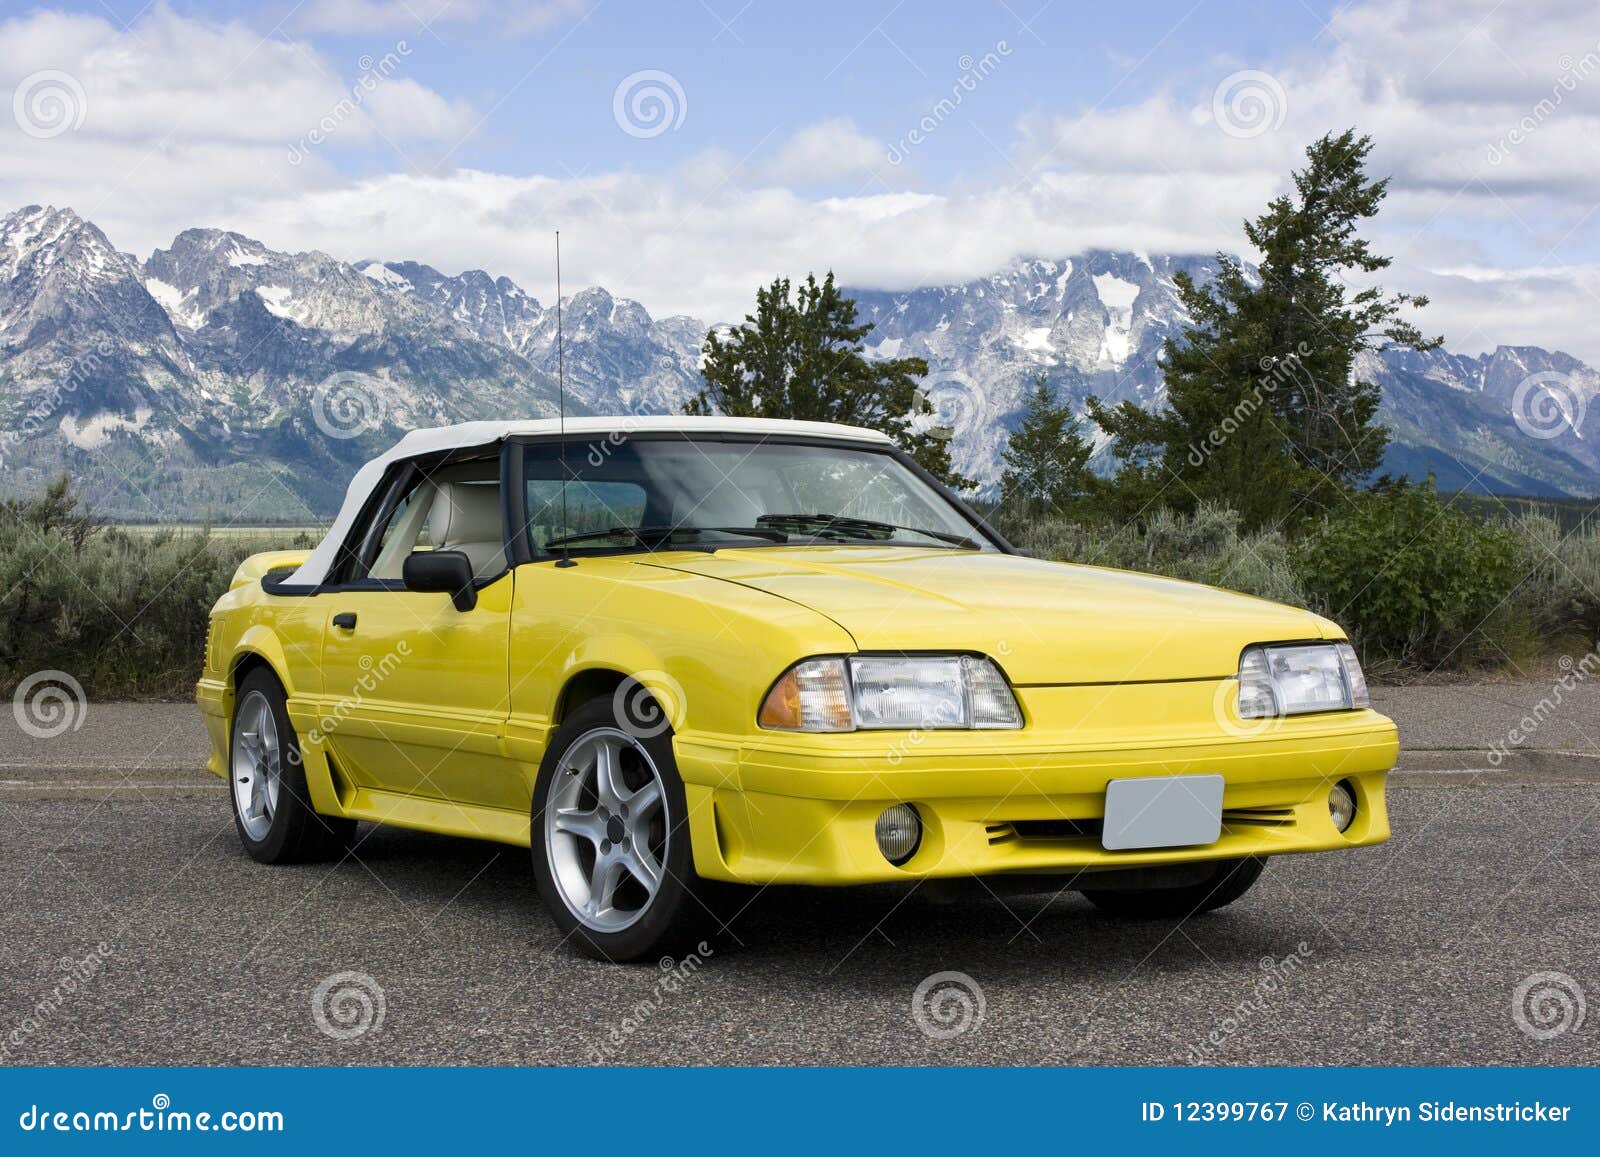 1991 ford mustang convertible yellow